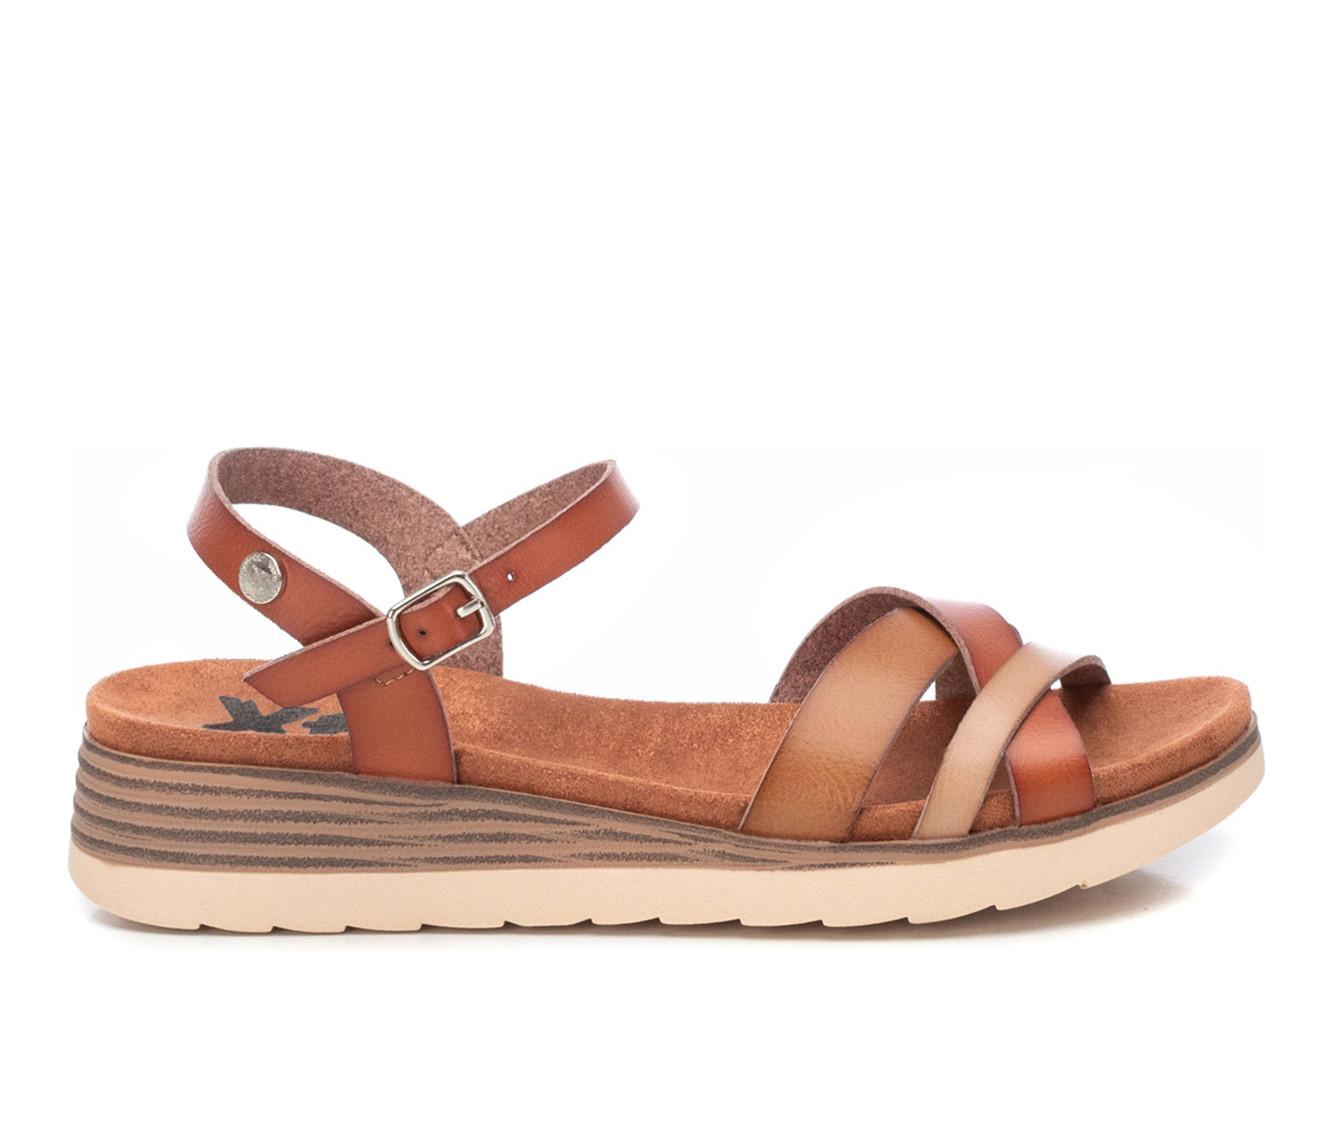 Women's Xti Blossom Low Wedge Sandals